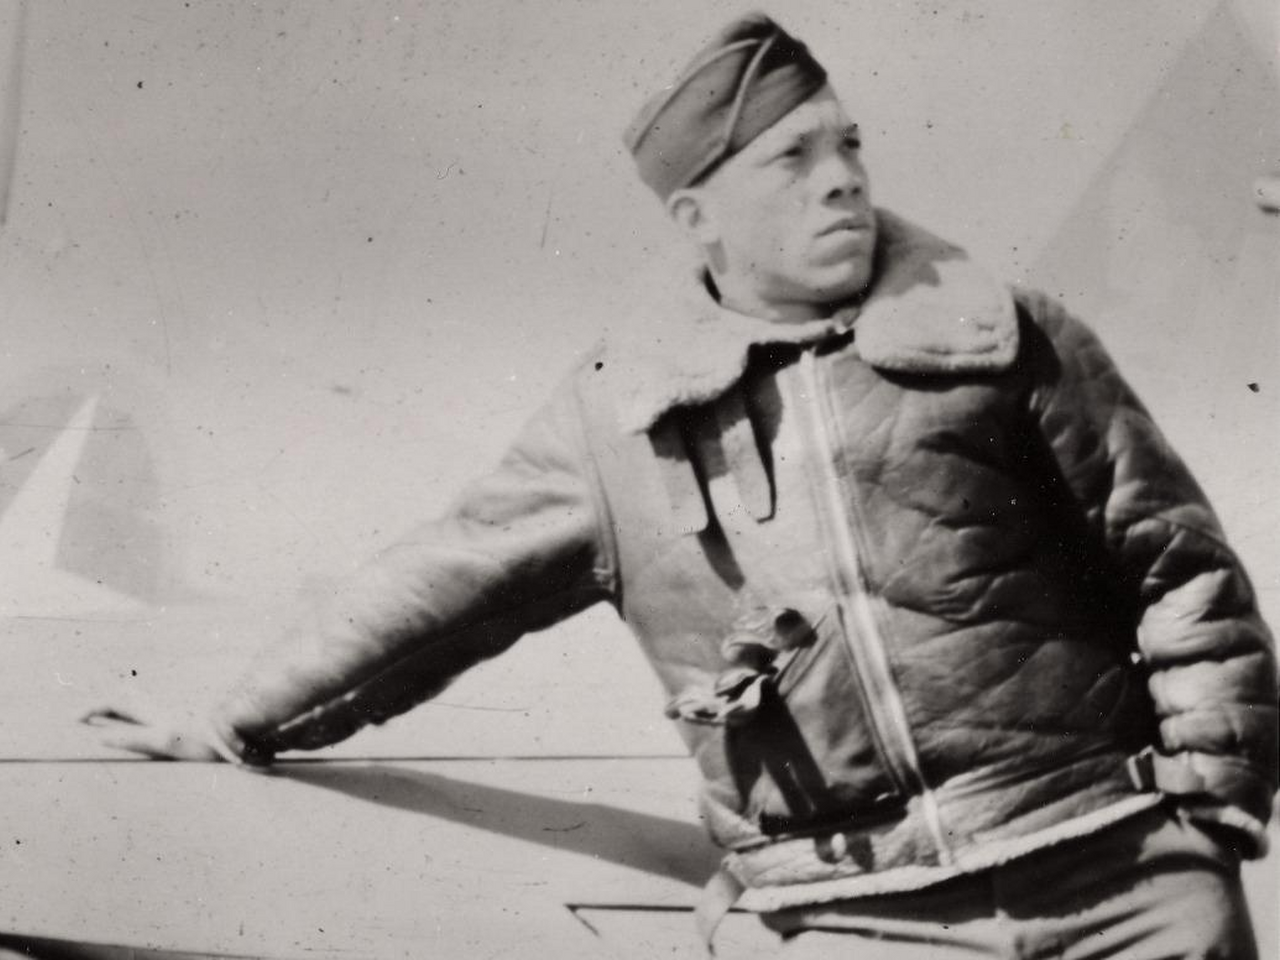 John Rogers Sr in uniform, leaning against an airplane